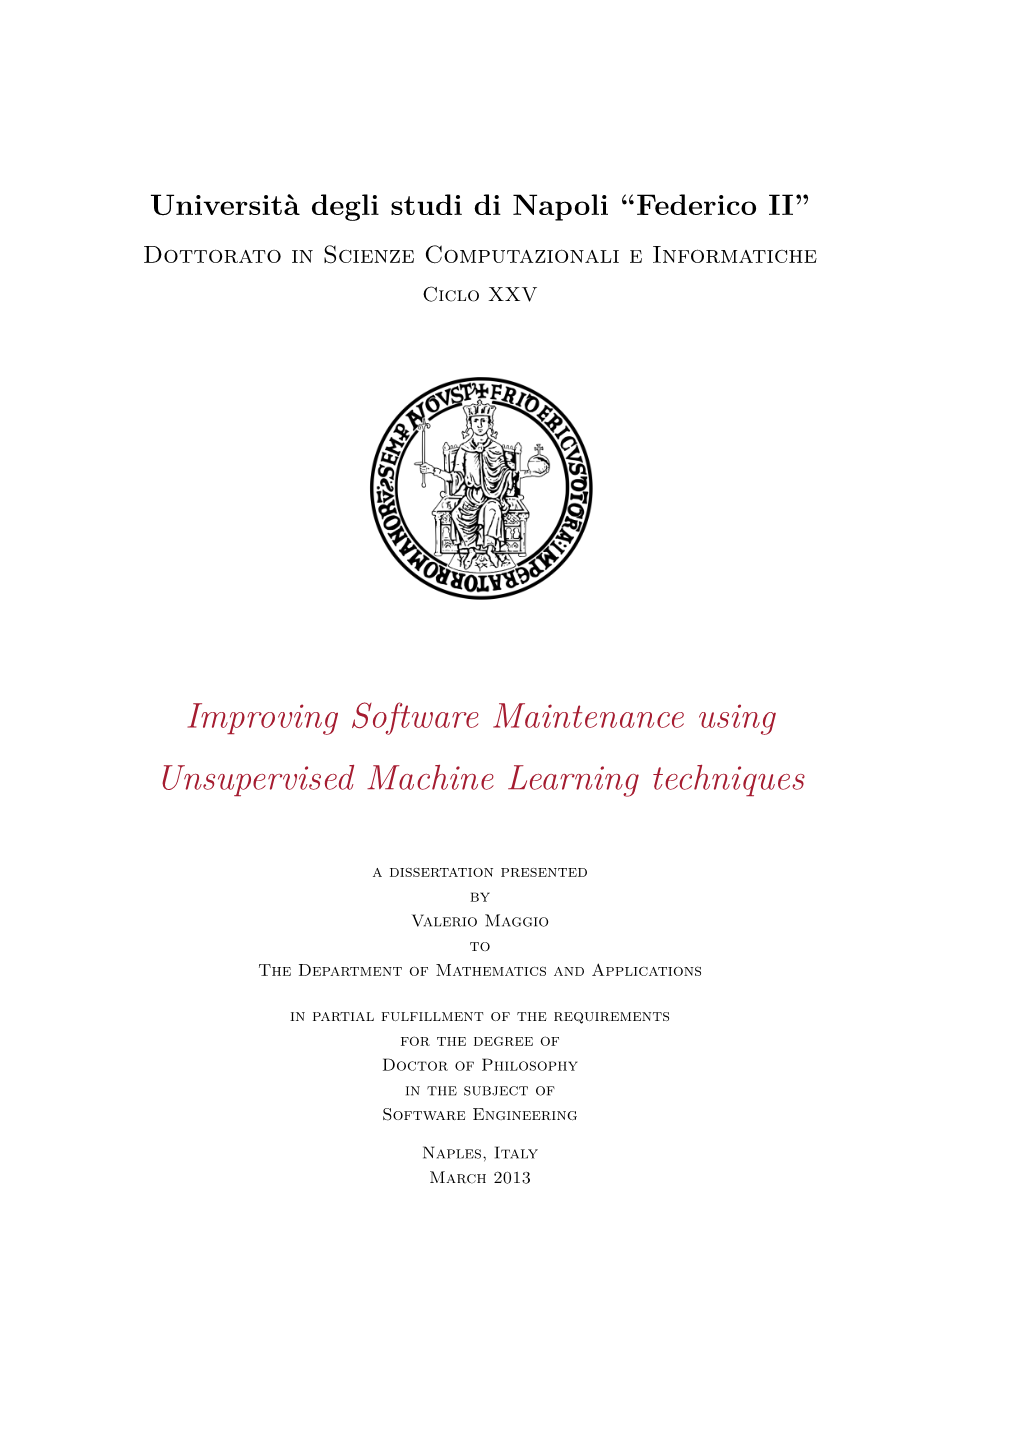 Improving Software Maintenance Using Unsupervised Machine Learning Techniques